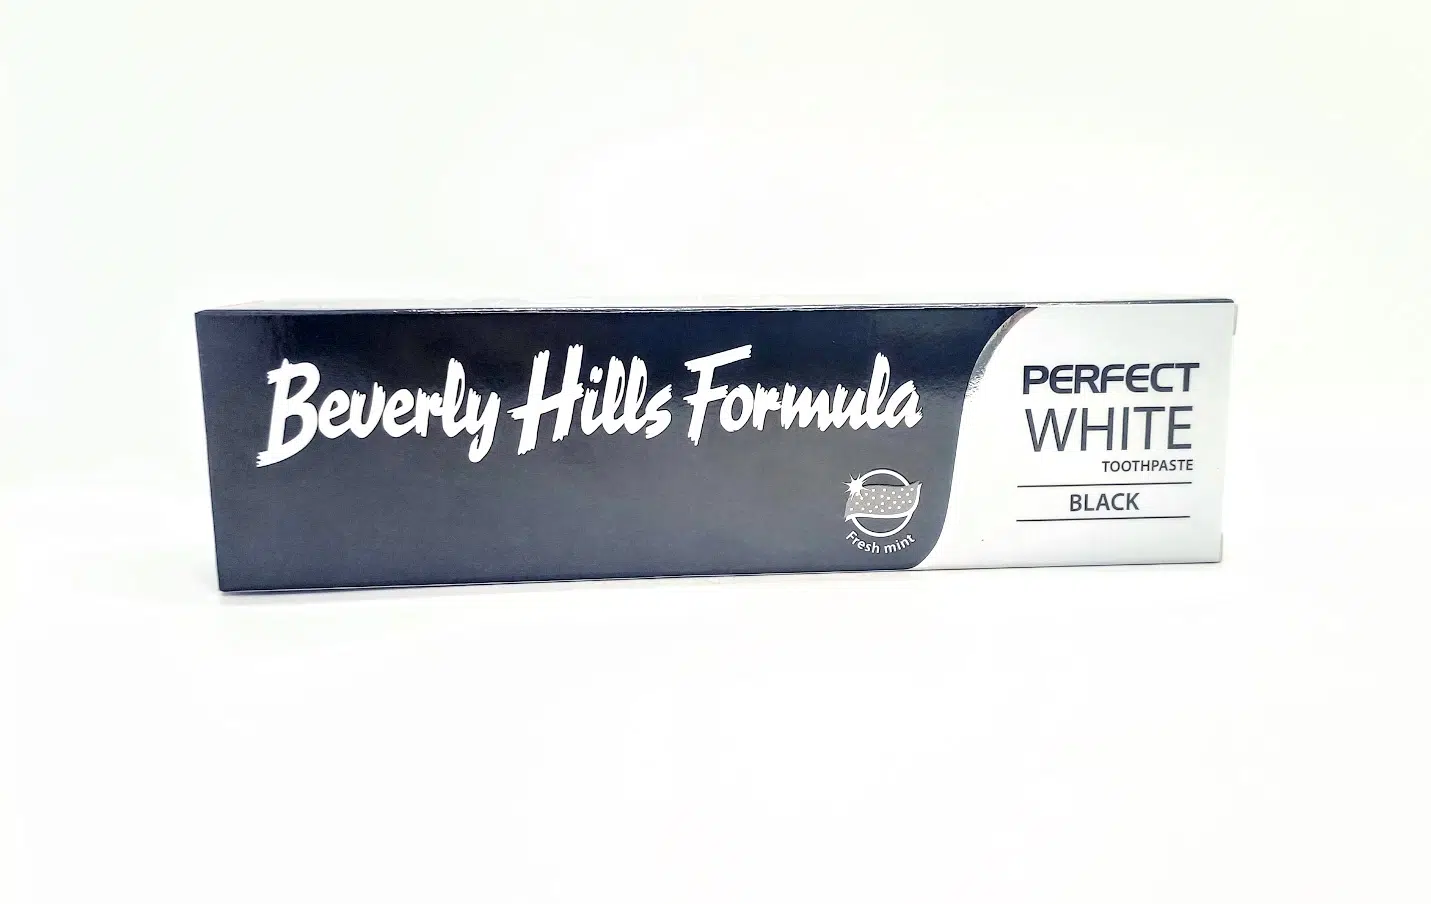 BEVERLY HILLS FORMULA PERFECT WHITE BLACK TOOTHPASTE 100ML